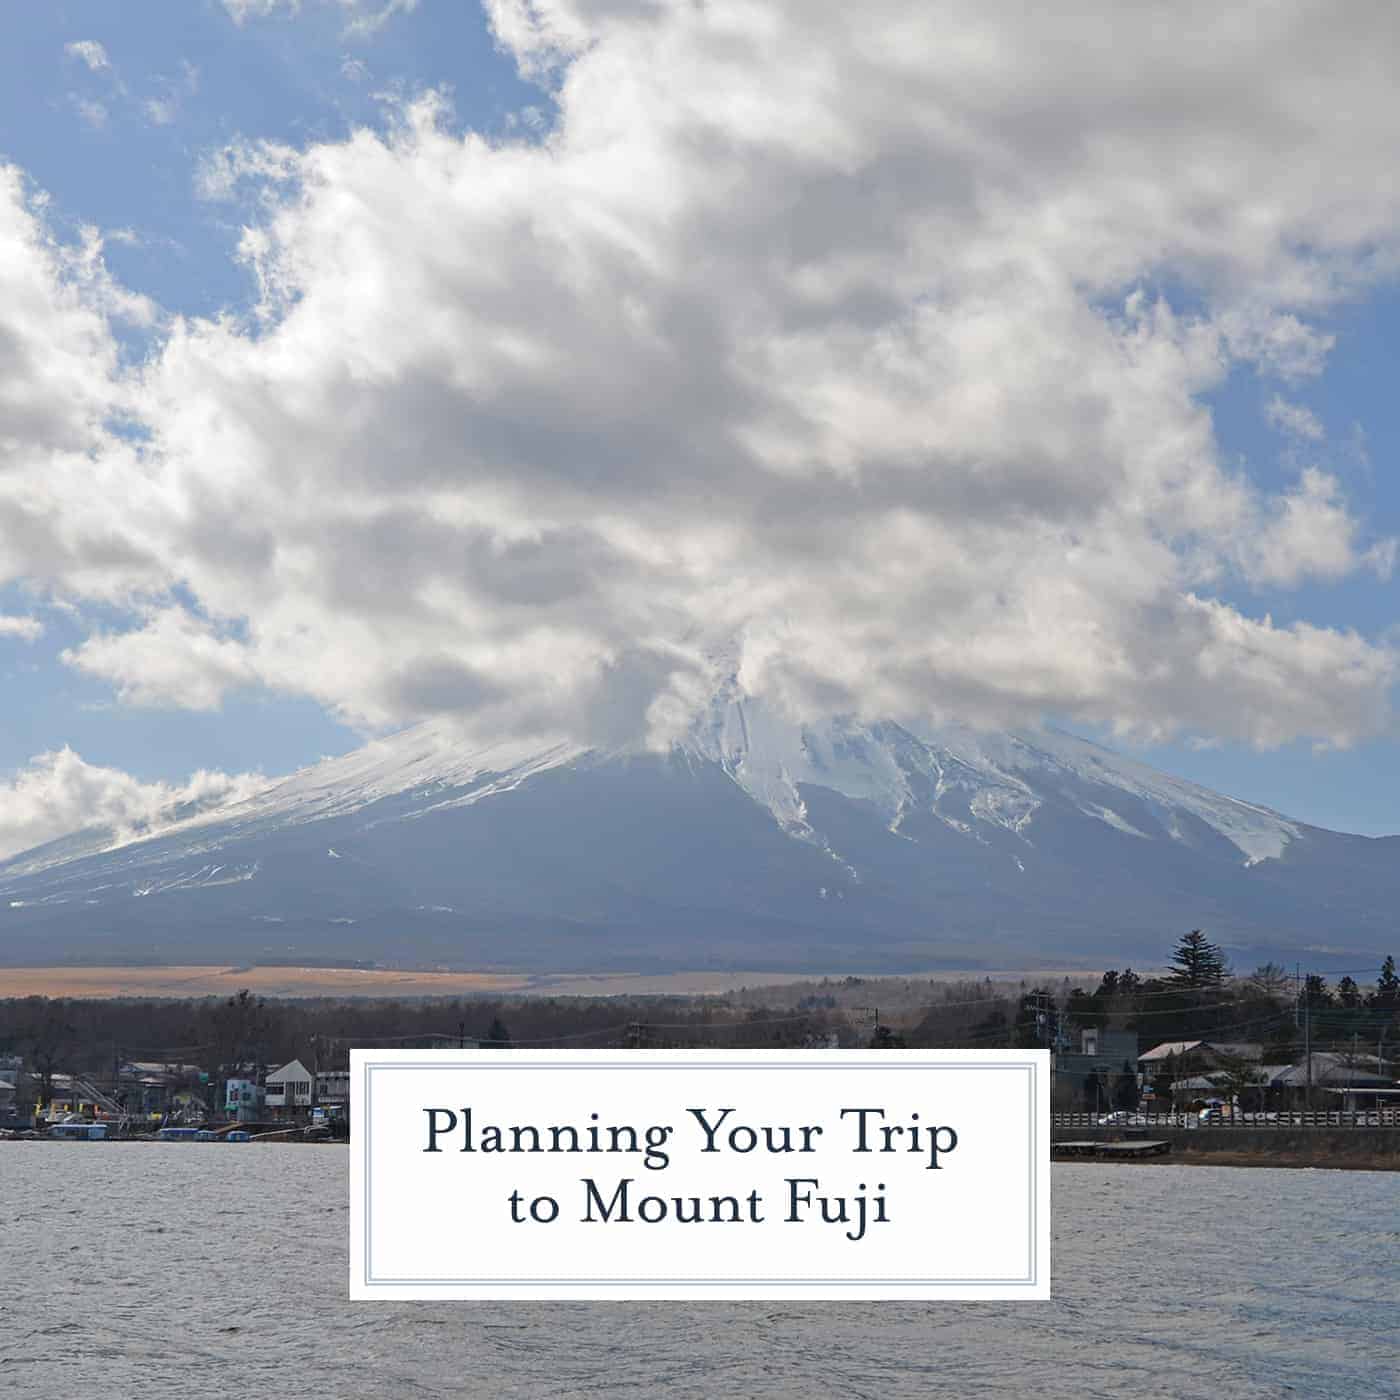 Easy tips on how to get the most out of your day trip from Tokyo to Mt. Fuji, Japan's active volcano and tallest peak. #tokyo #japan #myfuji www.savoryexperiments.com 